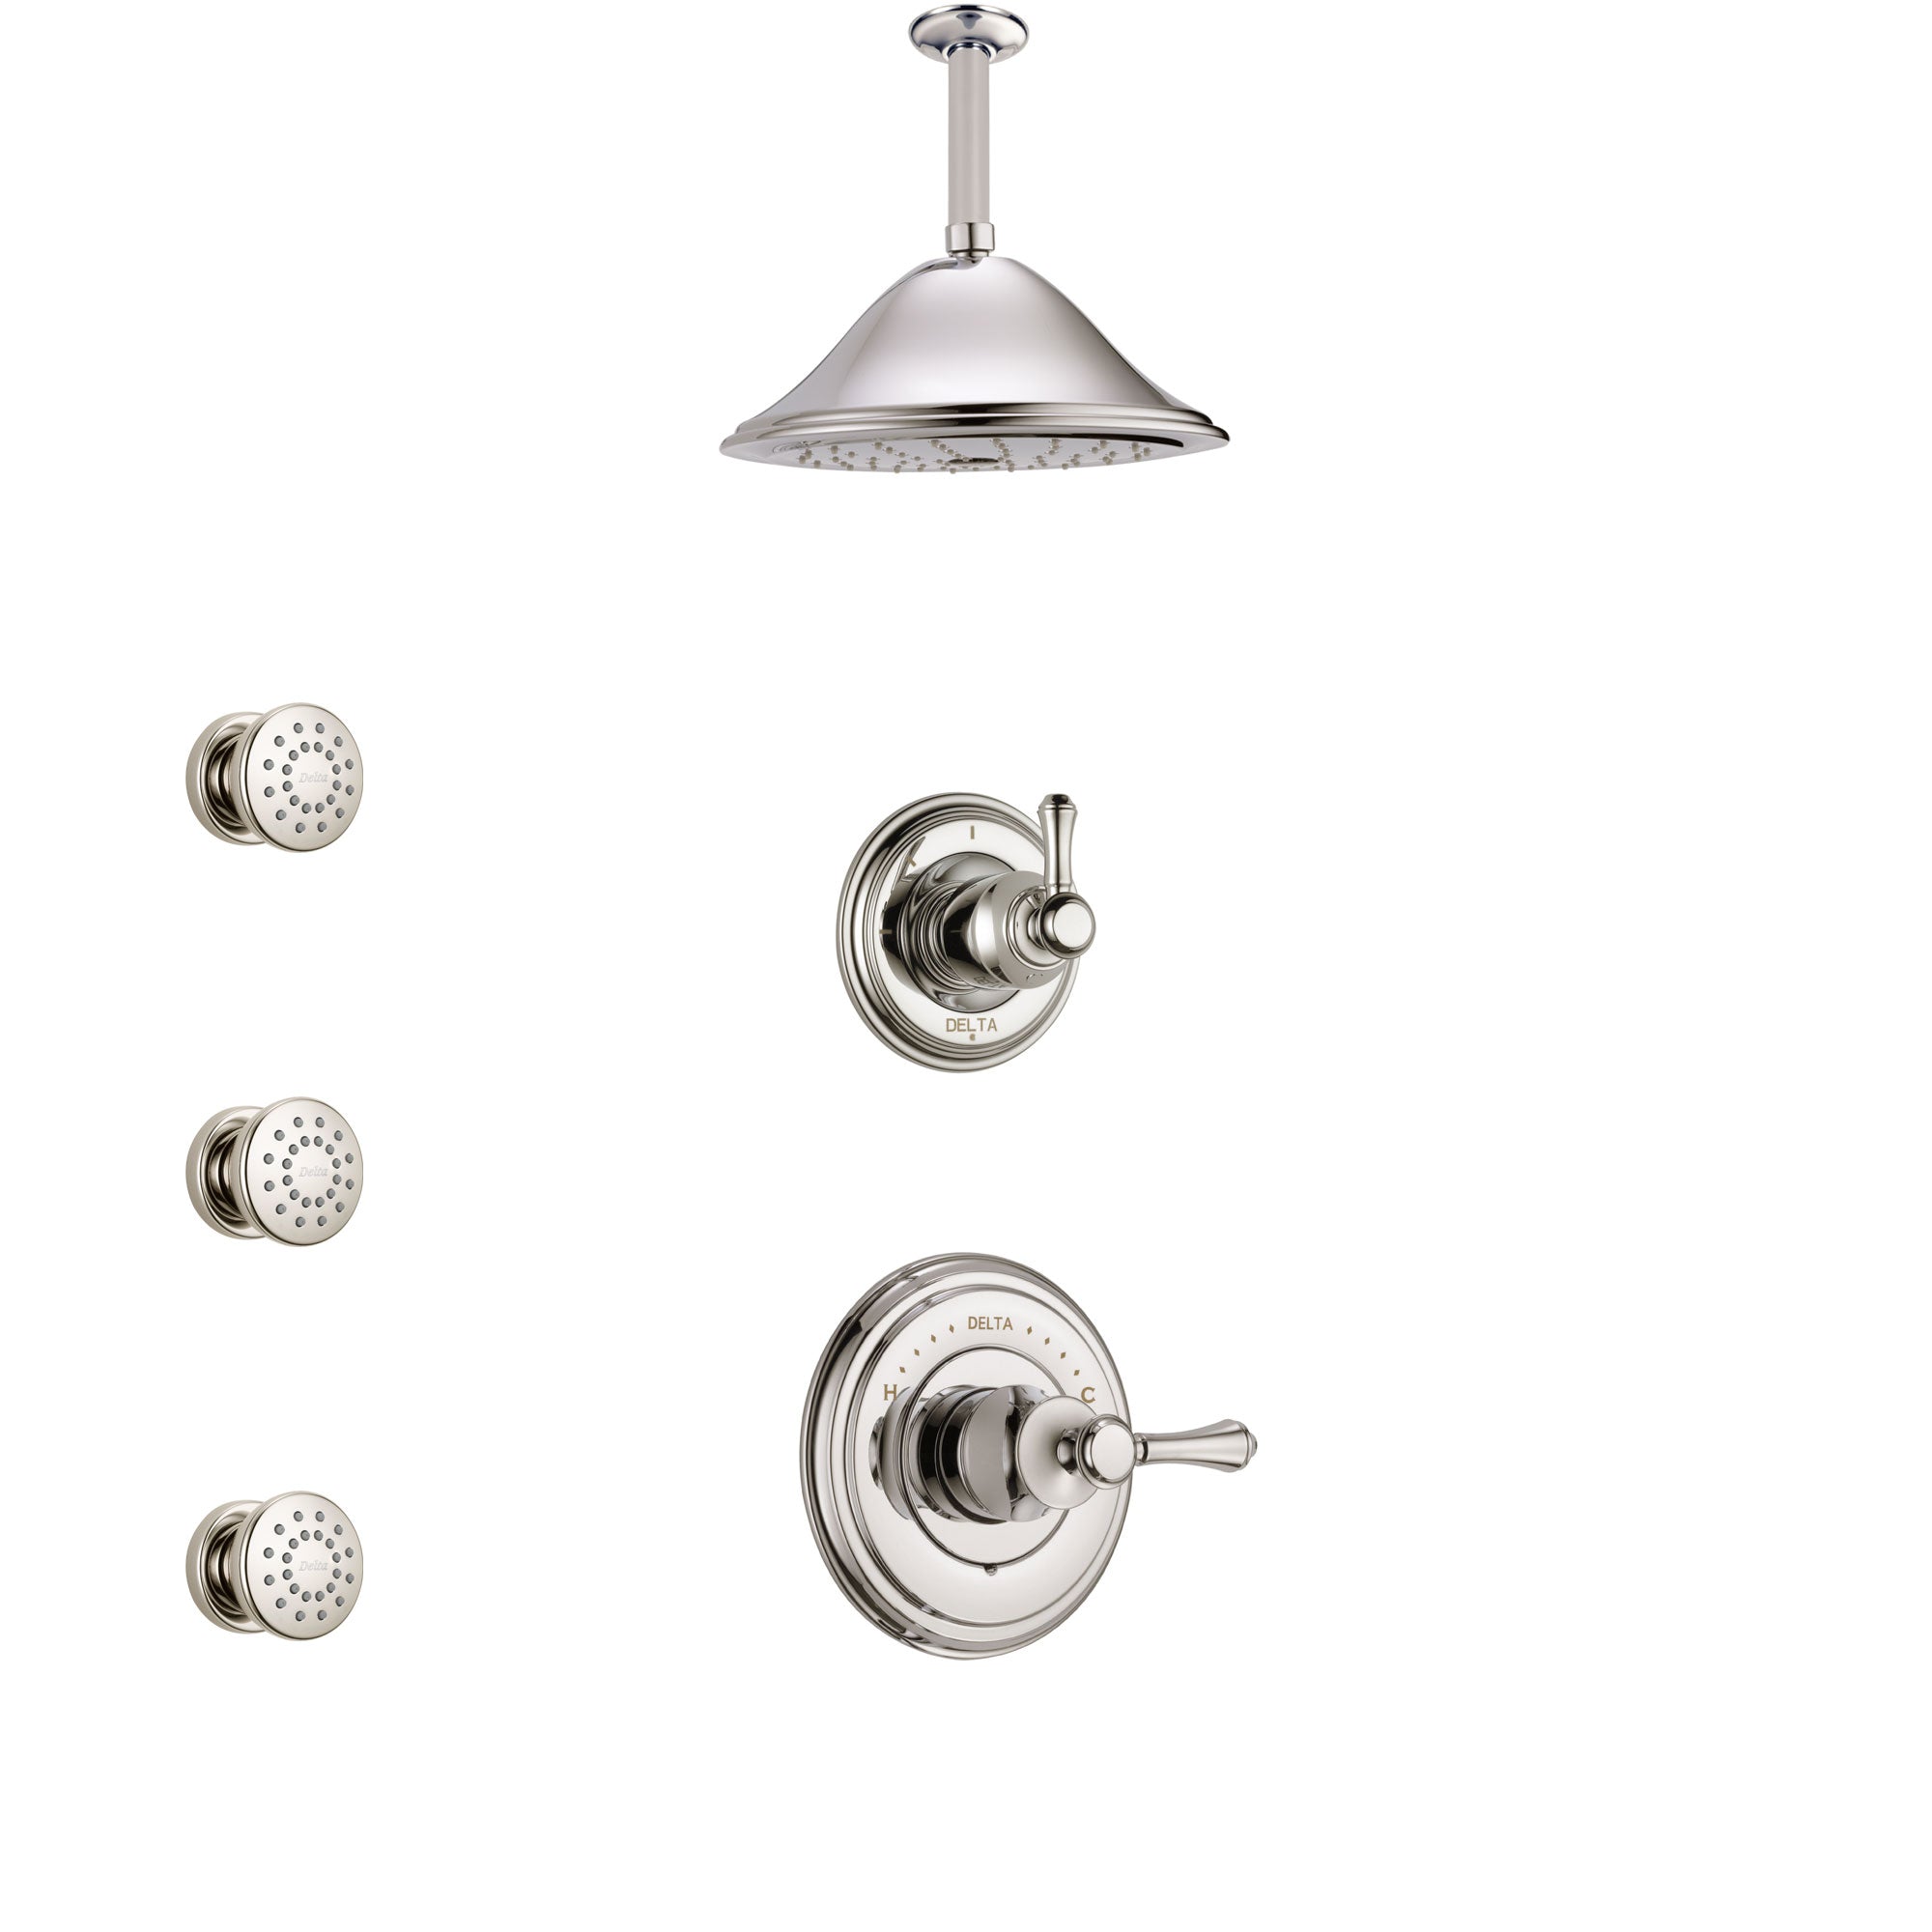 Delta Cassidy Polished Nickel Finish Shower System with Control Handle, 3-Setting Diverter, Ceiling Mount Showerhead, and 3 Body Sprays SS14972PN4